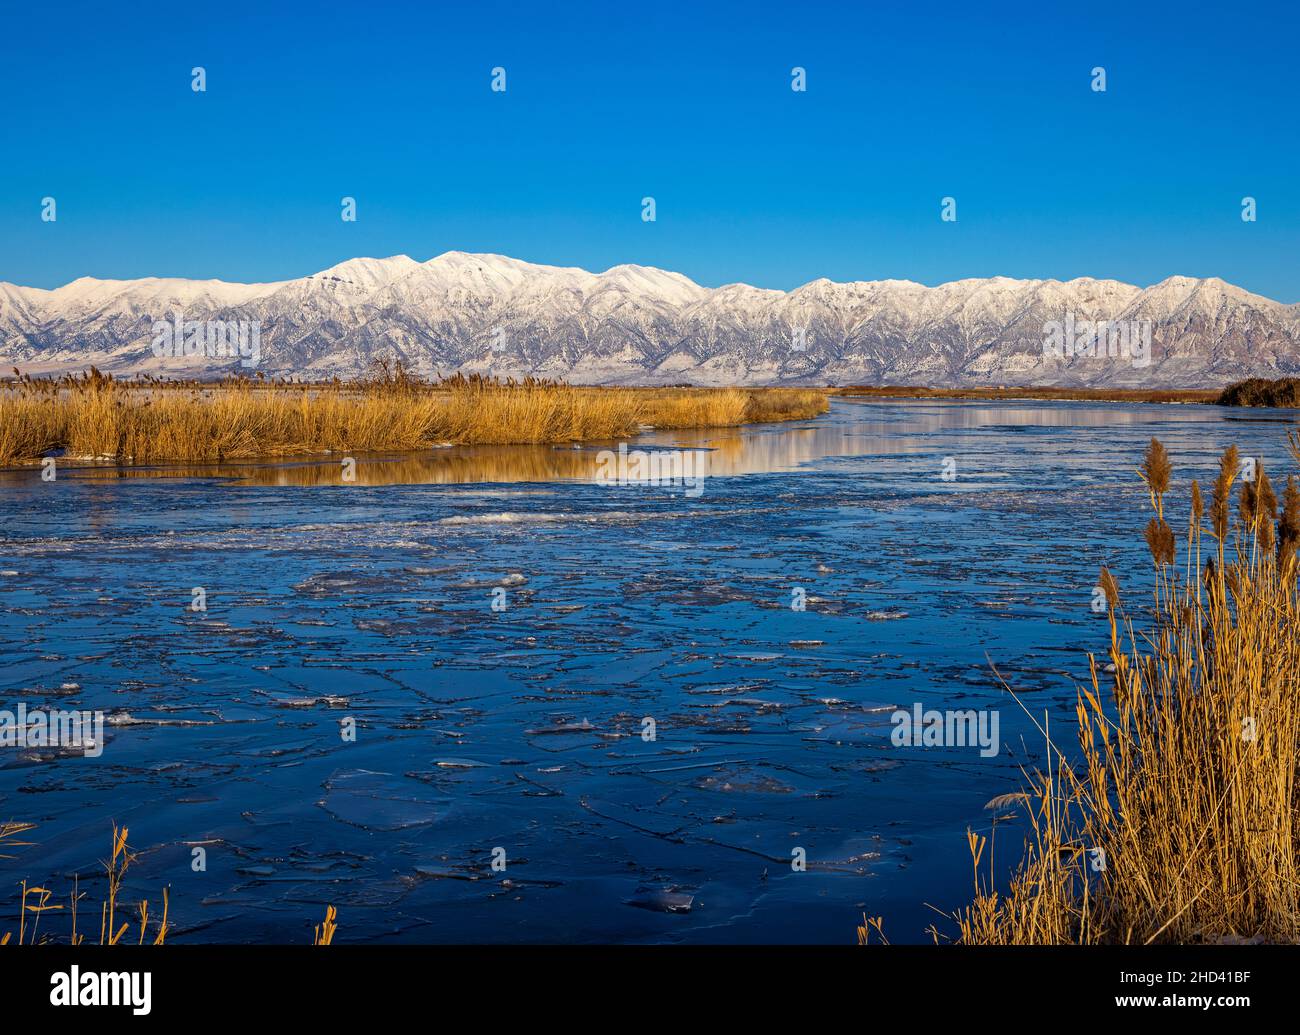 This view looks across the icy Bear River at the Wellsville Mountains from Bear River Migratory Bird Refuge, Brigham City, Box Elder County, Utah, USA. Stock Photo